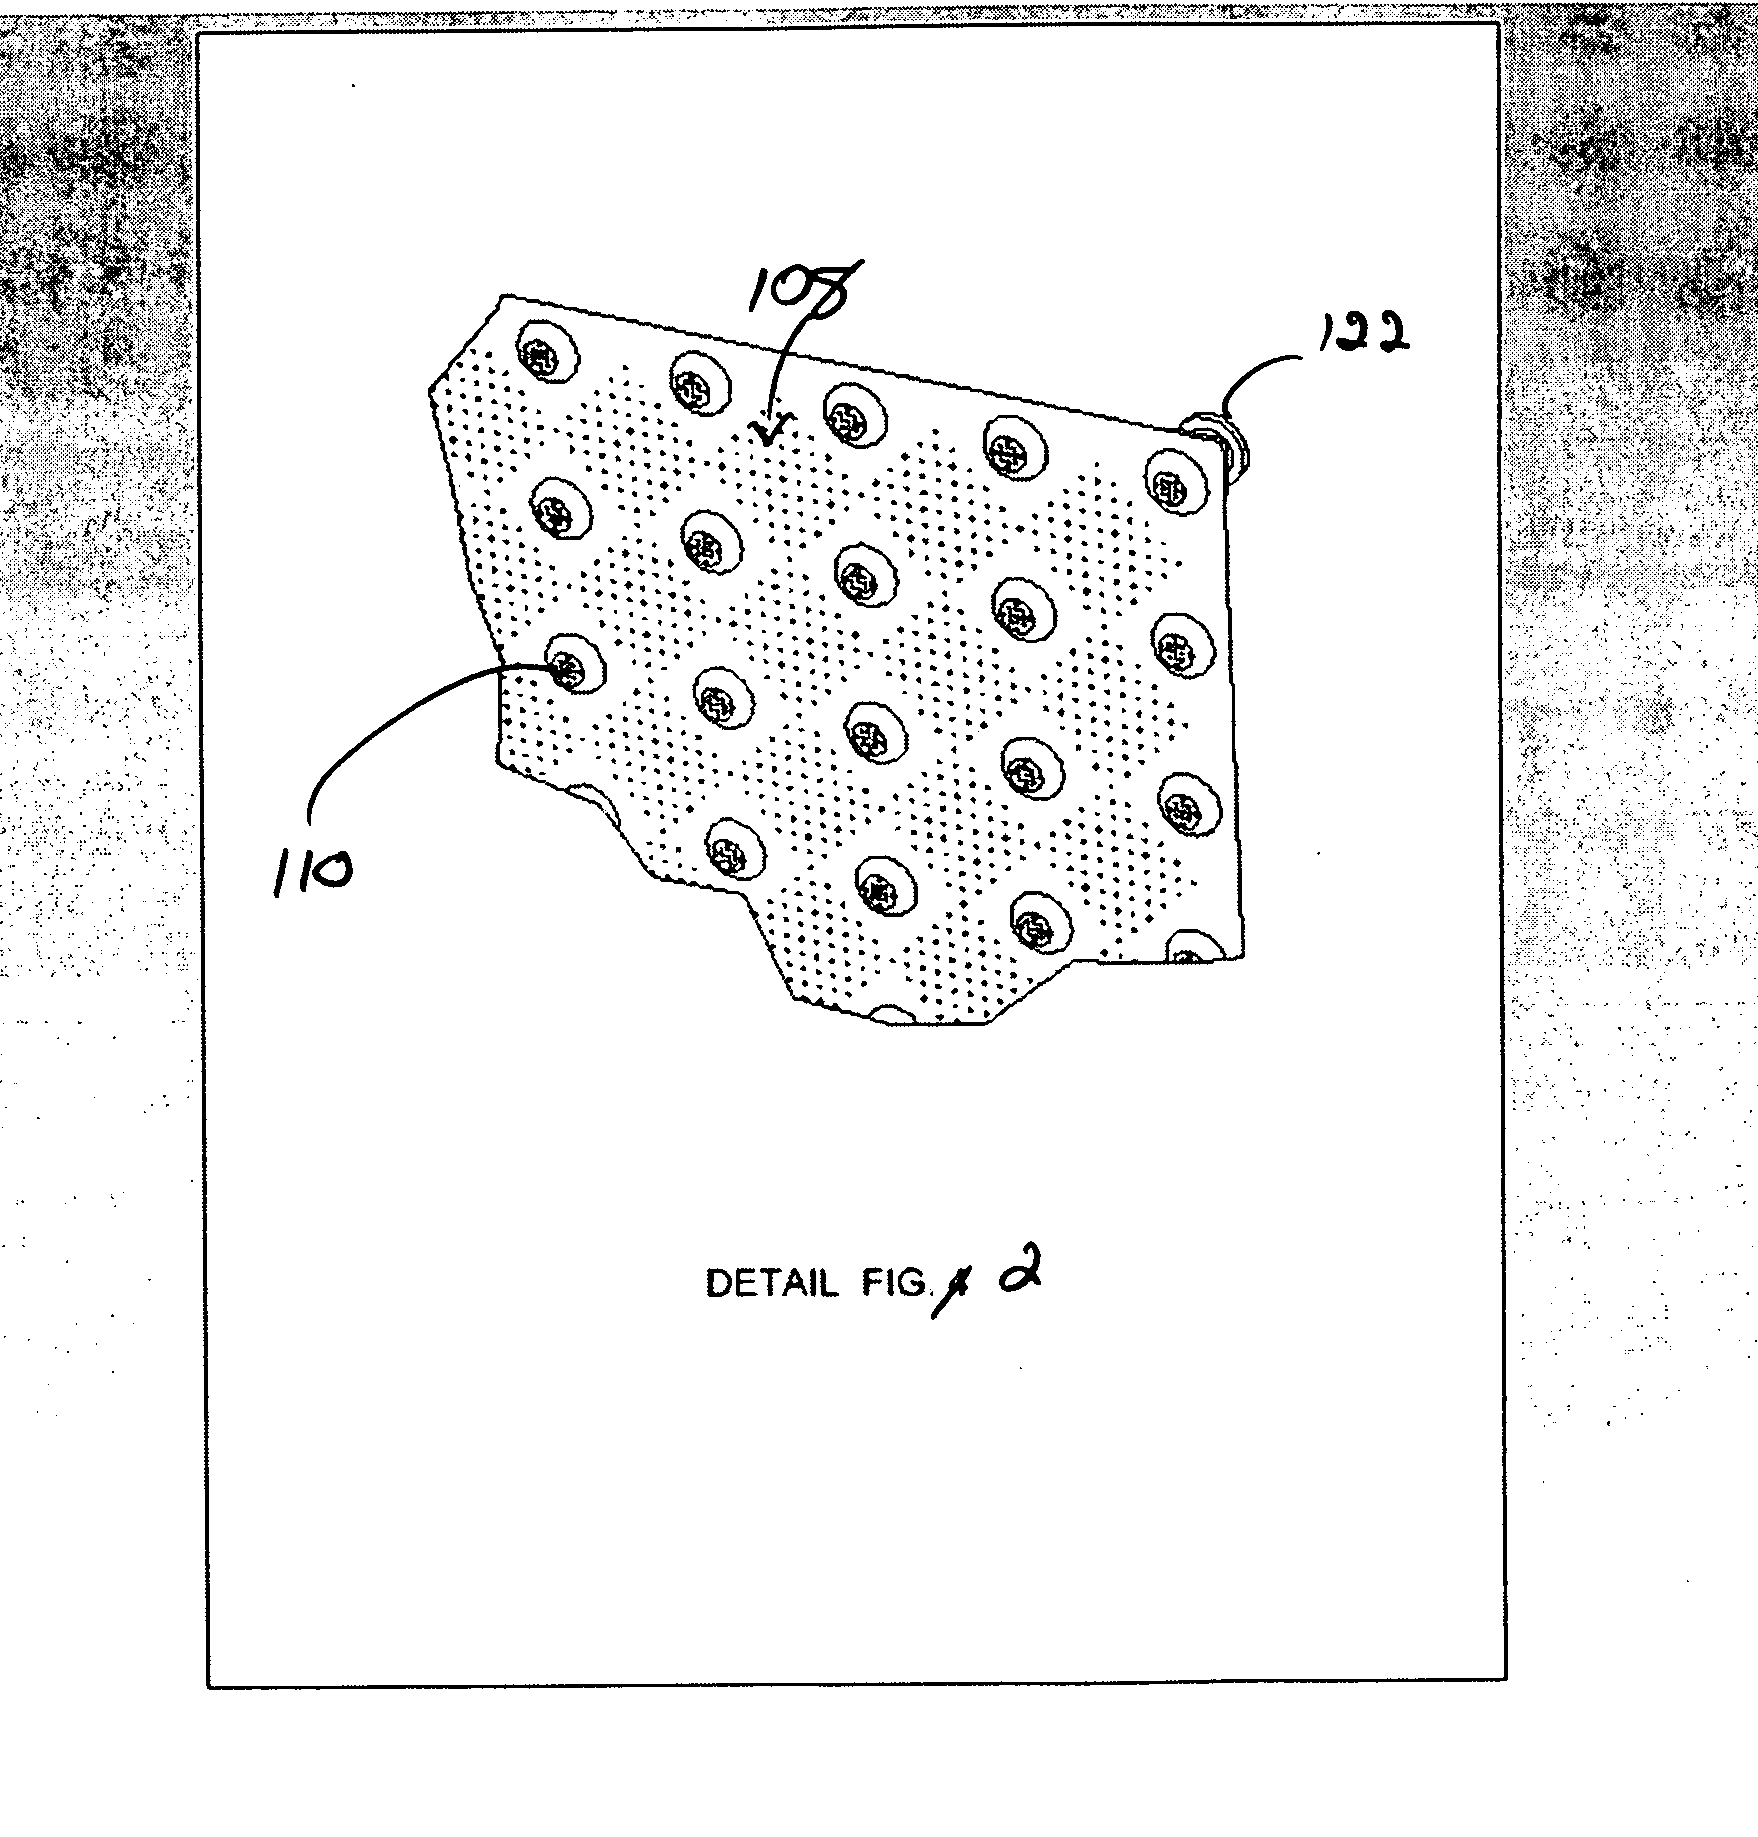 Tactile tile product for the visually impaired, method of manufacture and methods of conducting business therewith